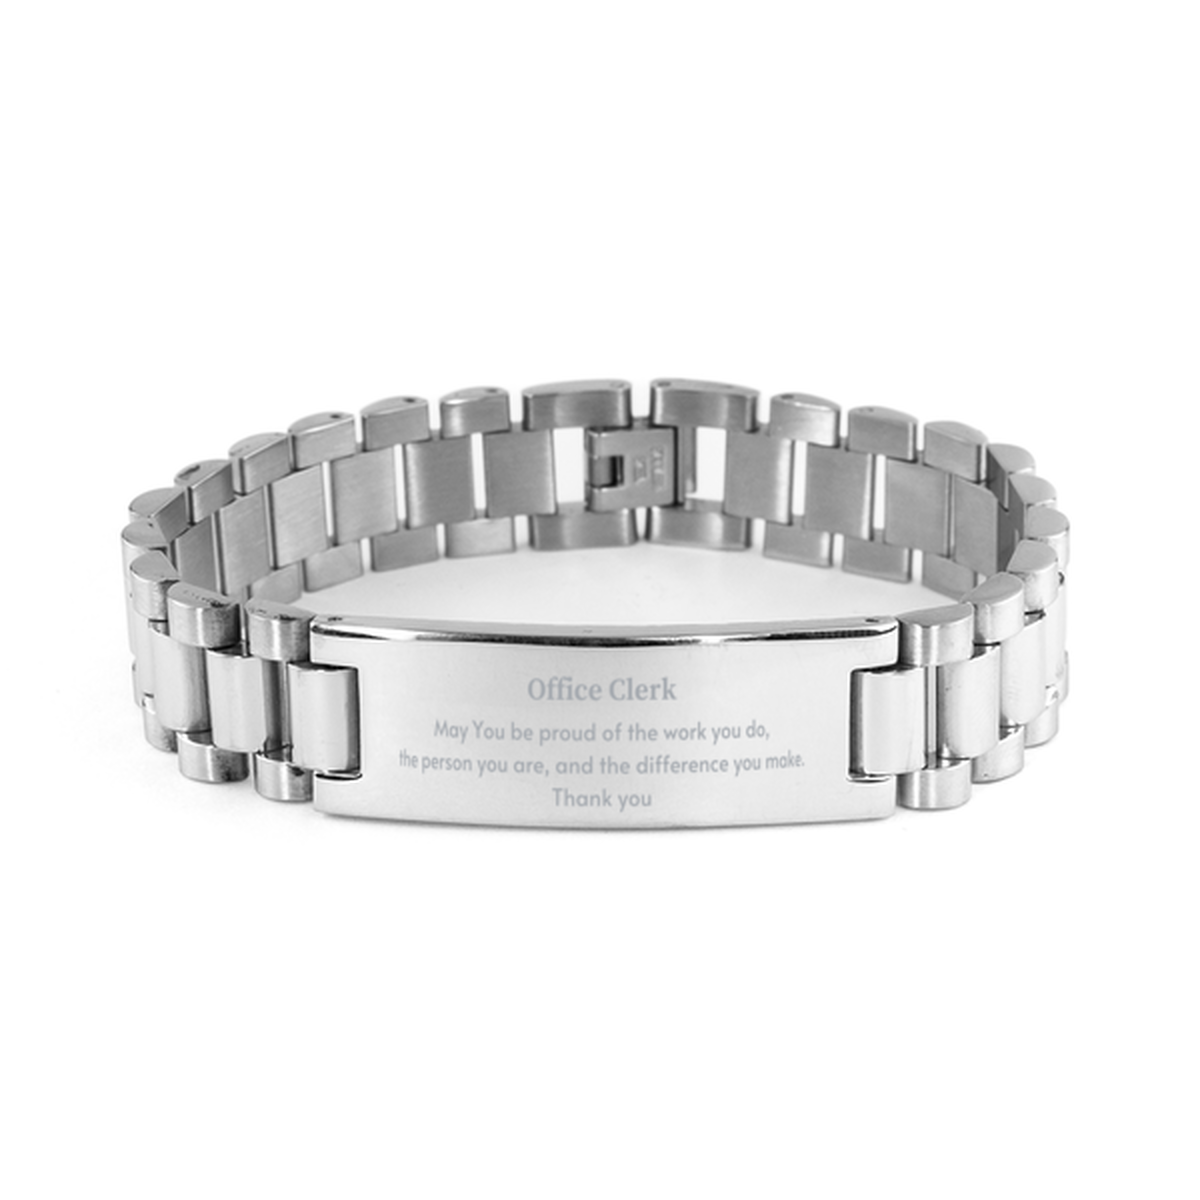 Heartwarming Ladder Stainless Steel Bracelet Retirement Coworkers Gifts for Office Clerk, Office Clerk May You be proud of the work you do, the person you are Gifts for Boss Men Women Friends